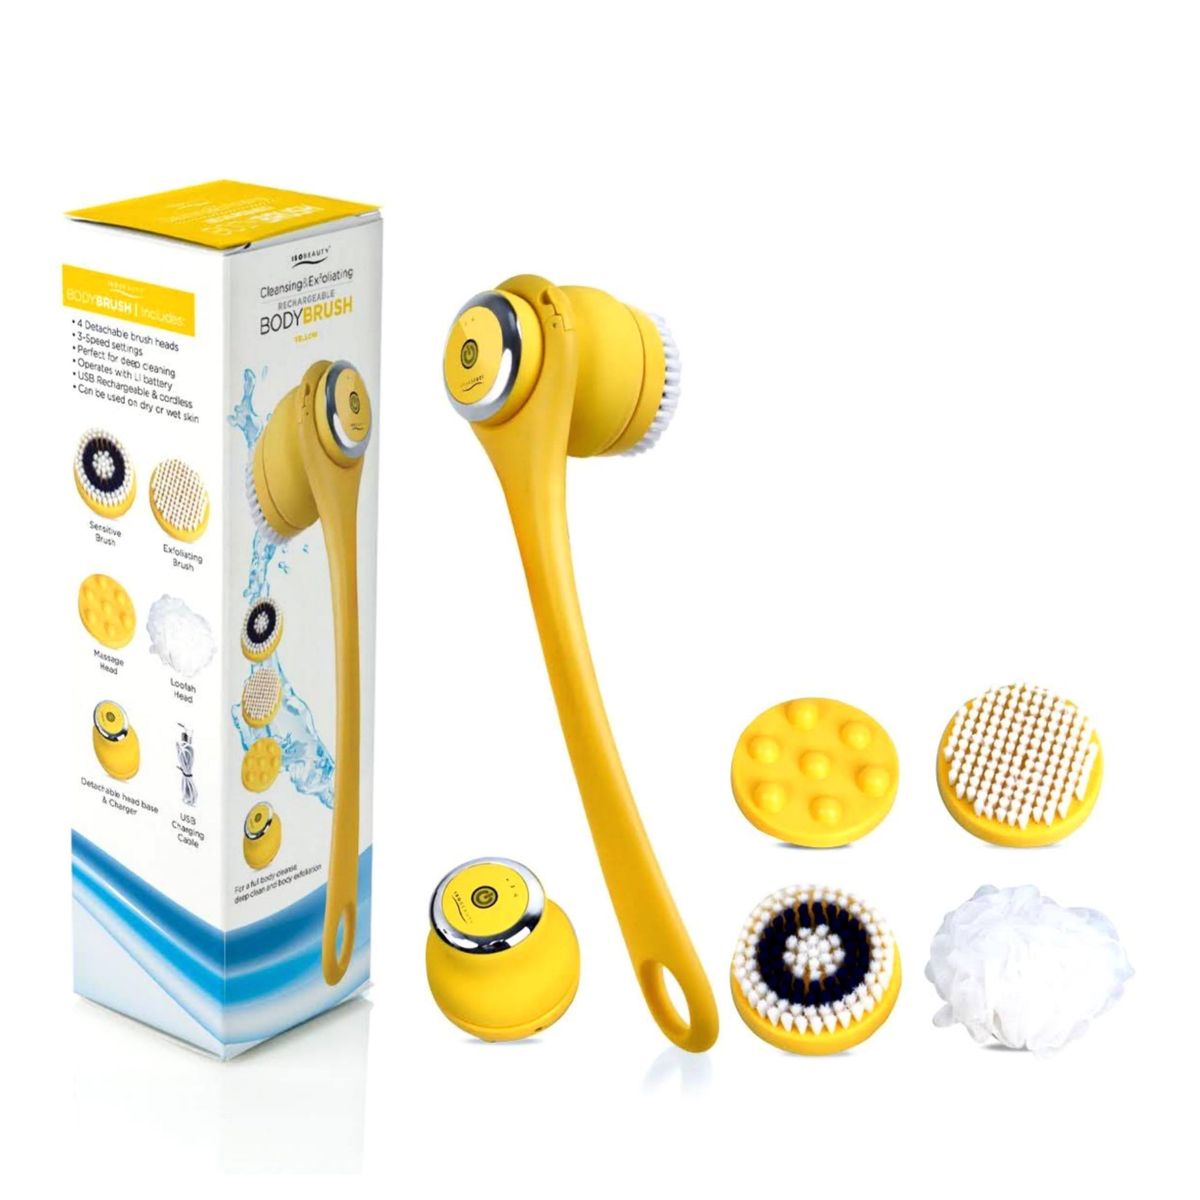 ISO Beauty™ Cleansing & Exfoliating Body Brushes - Yellow